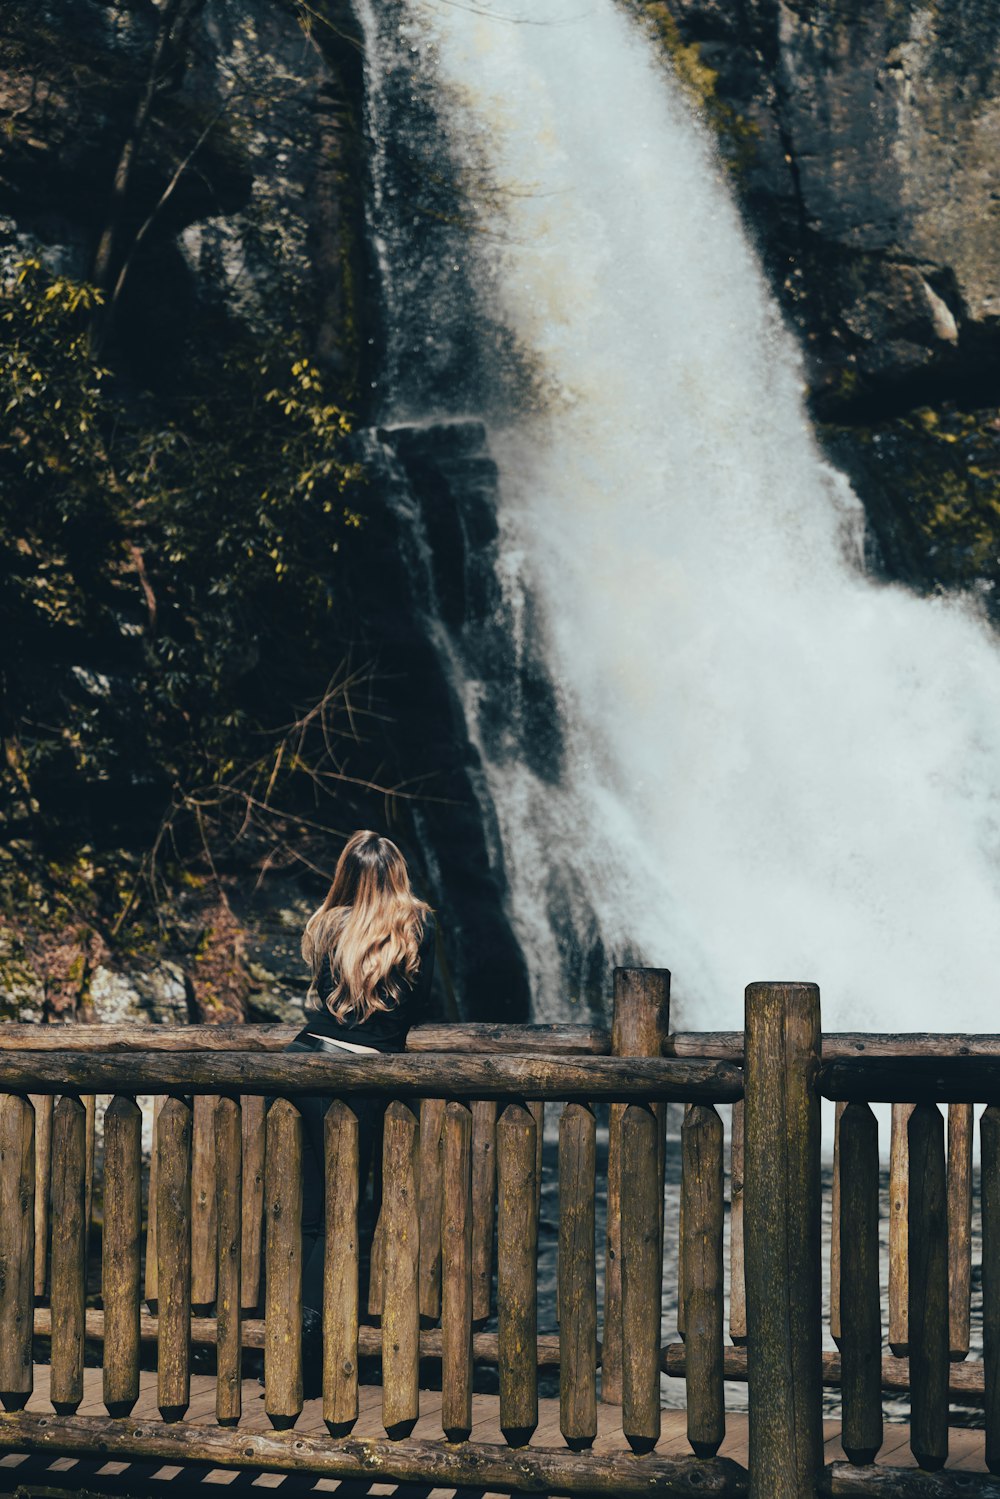 a woman sitting on a wooden bench next to a waterfall